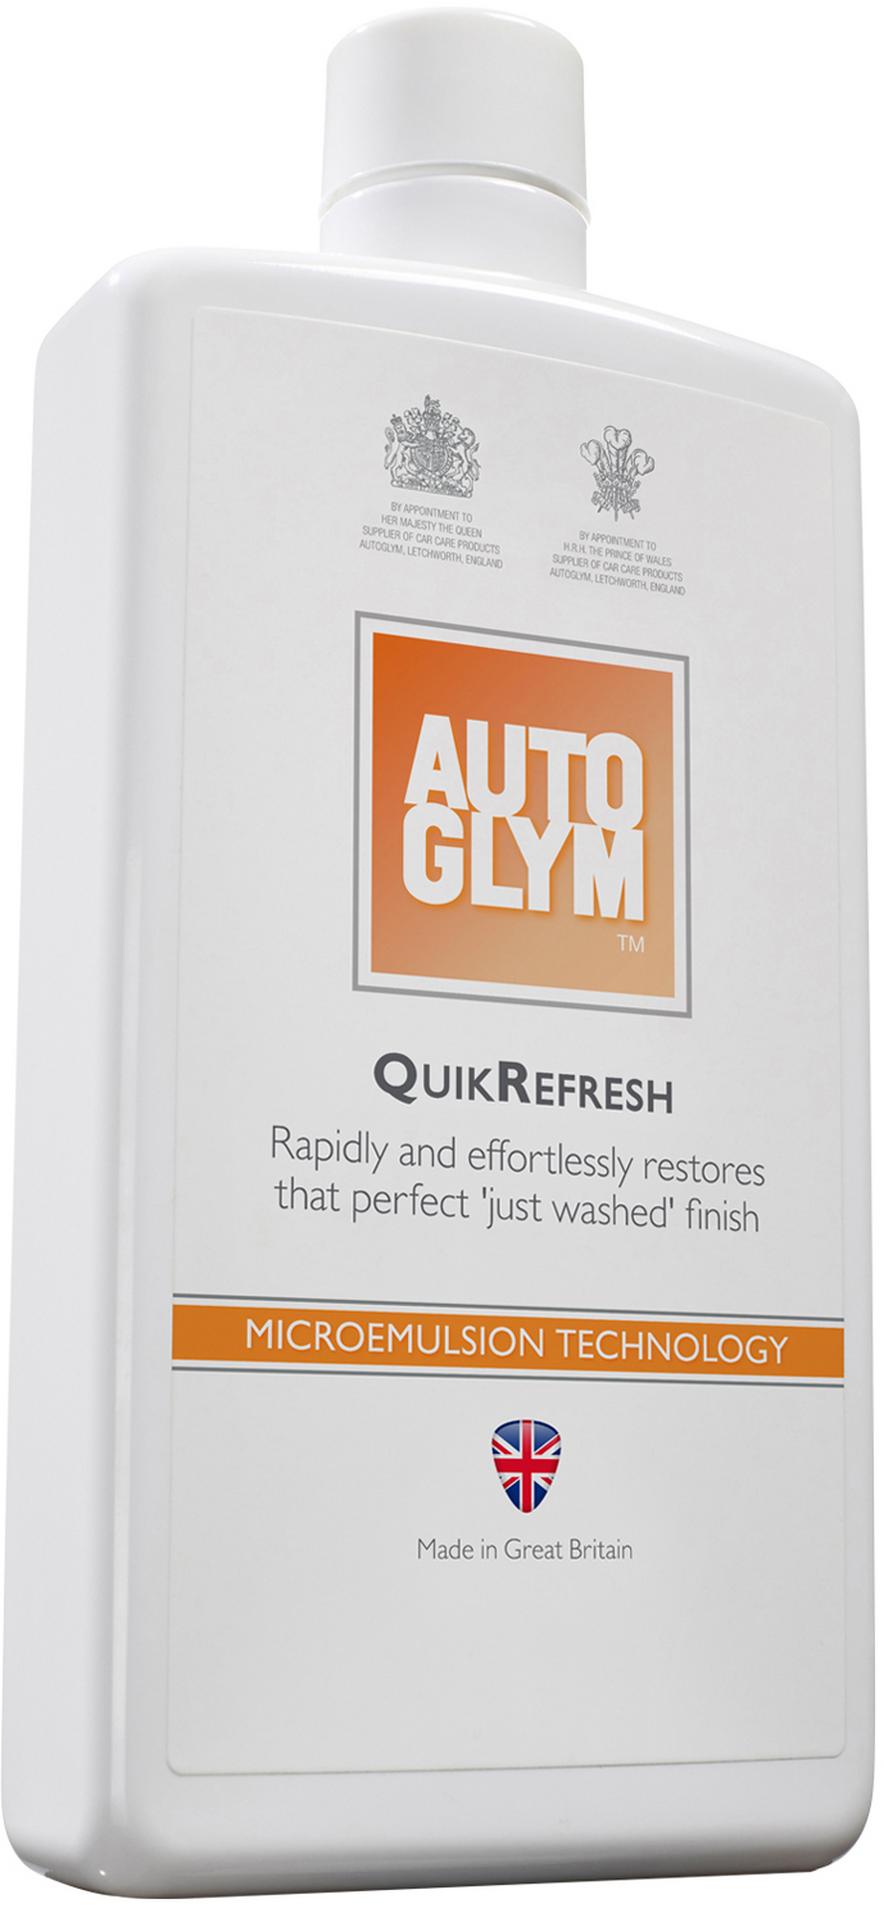 Autoglym Professional Cleaning Products, Kent